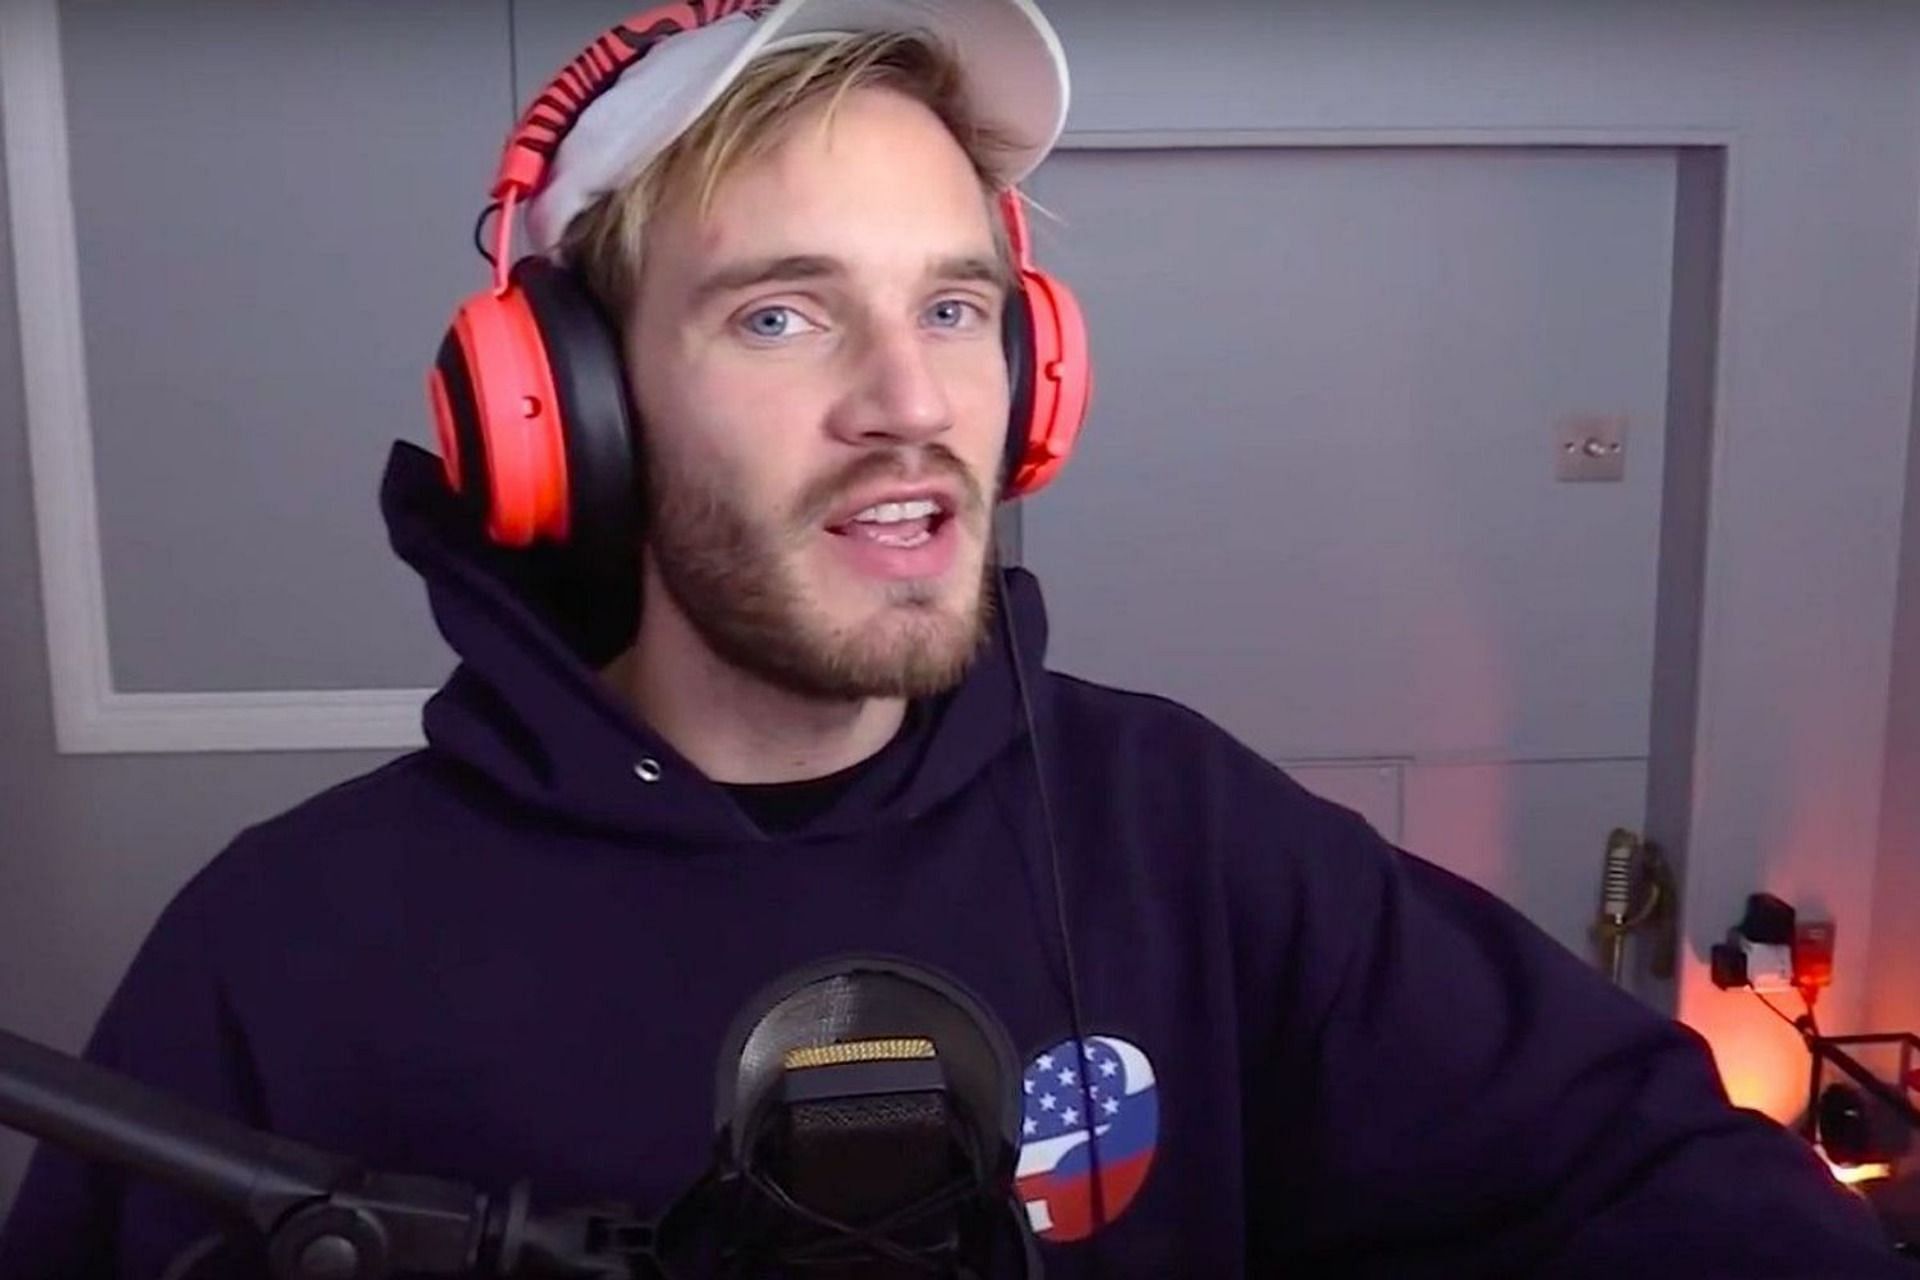 How Much Does Pewdiepie Make Per Video Youtubers Stunning Fortune In 2022 Explored 1721